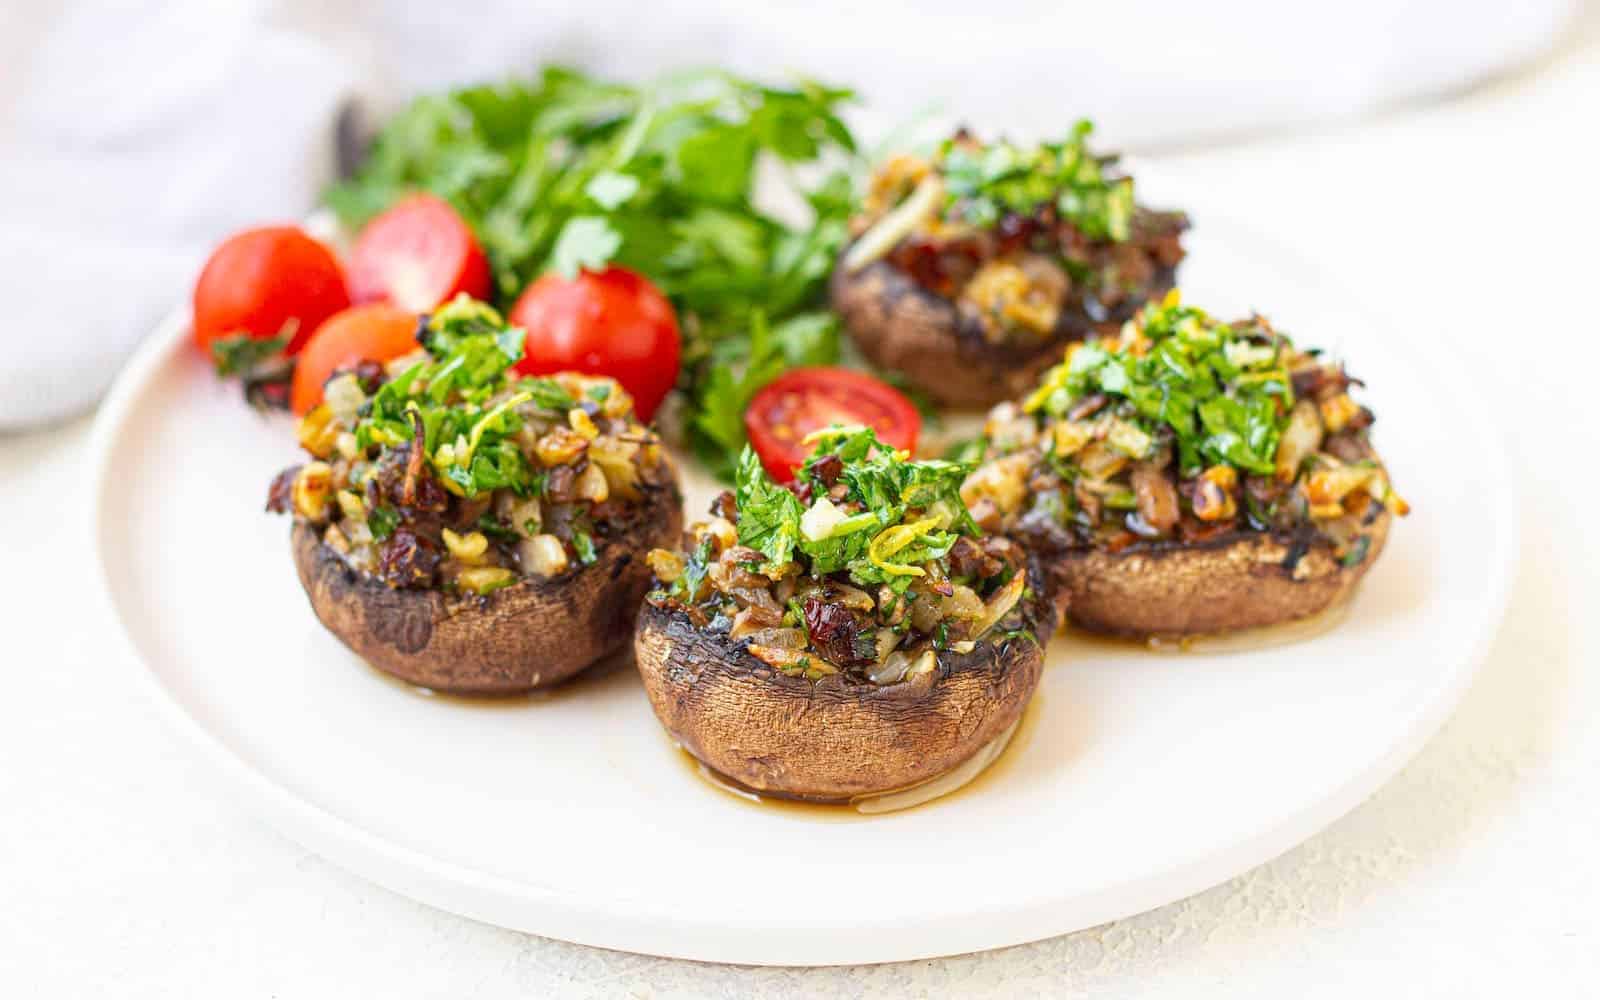 A white plate with vegan stuffed portobello mushrooms garnished with cherry tomatoes and parsley.